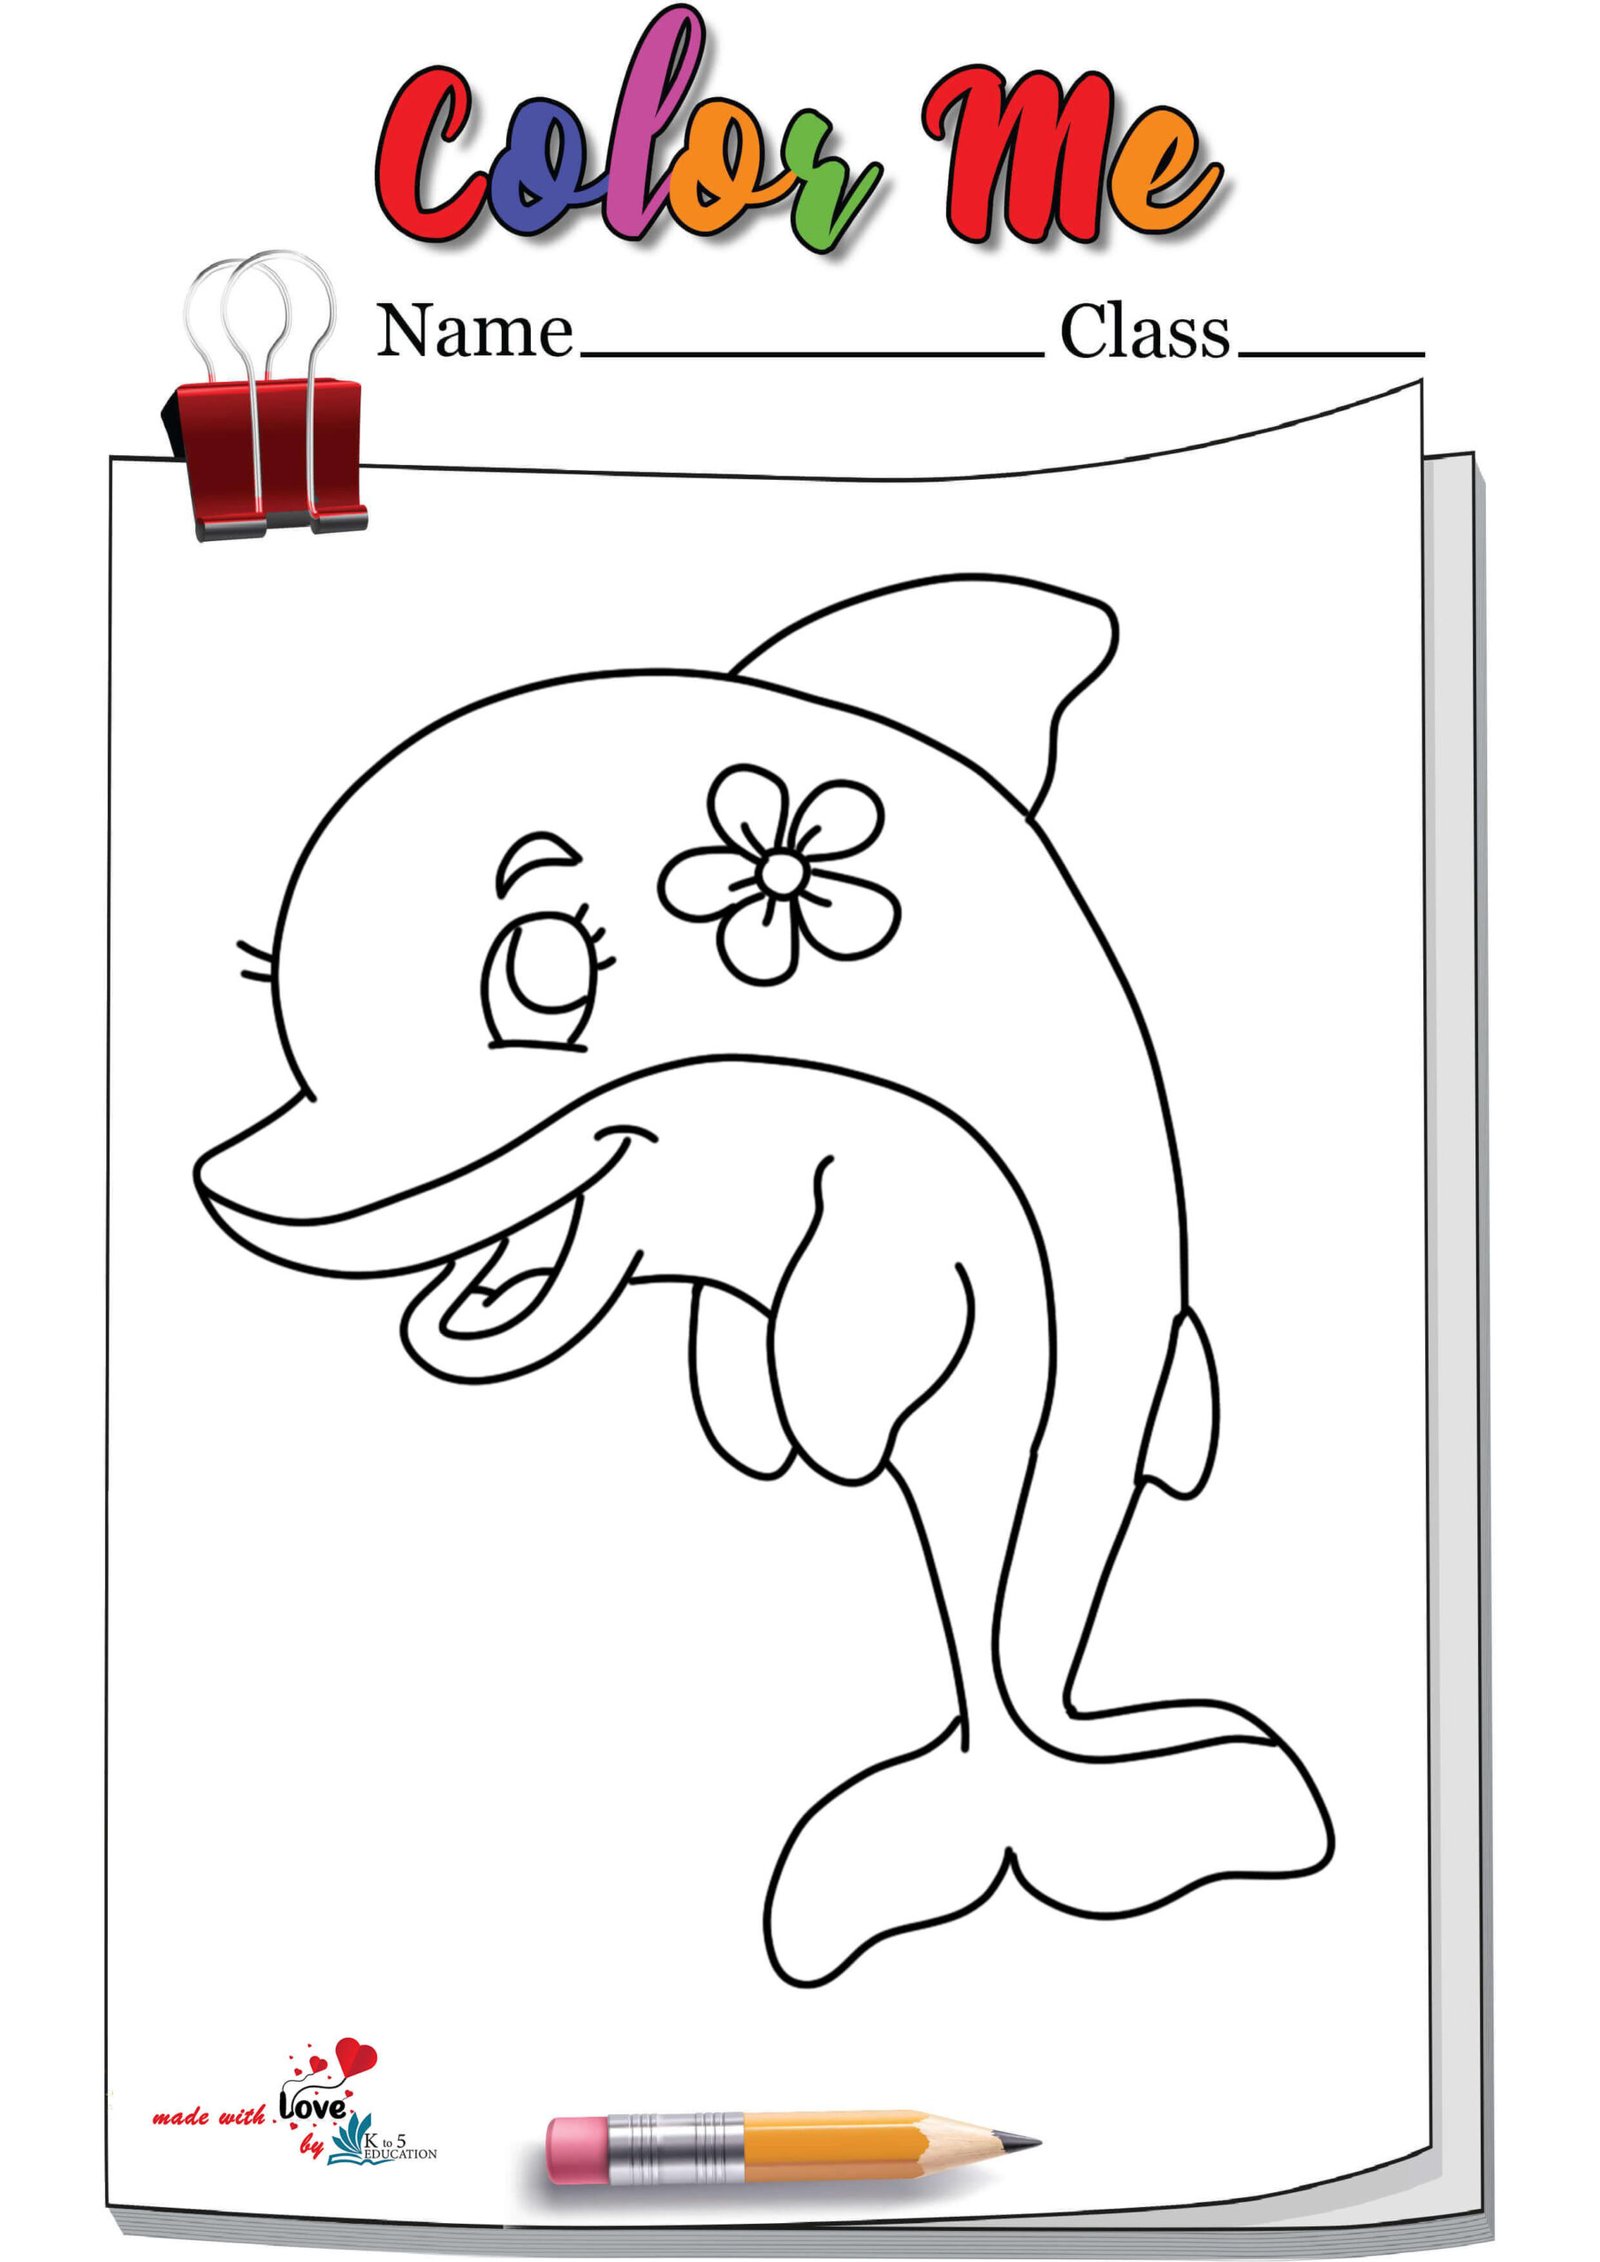 Cute Dolphin Coloring Page